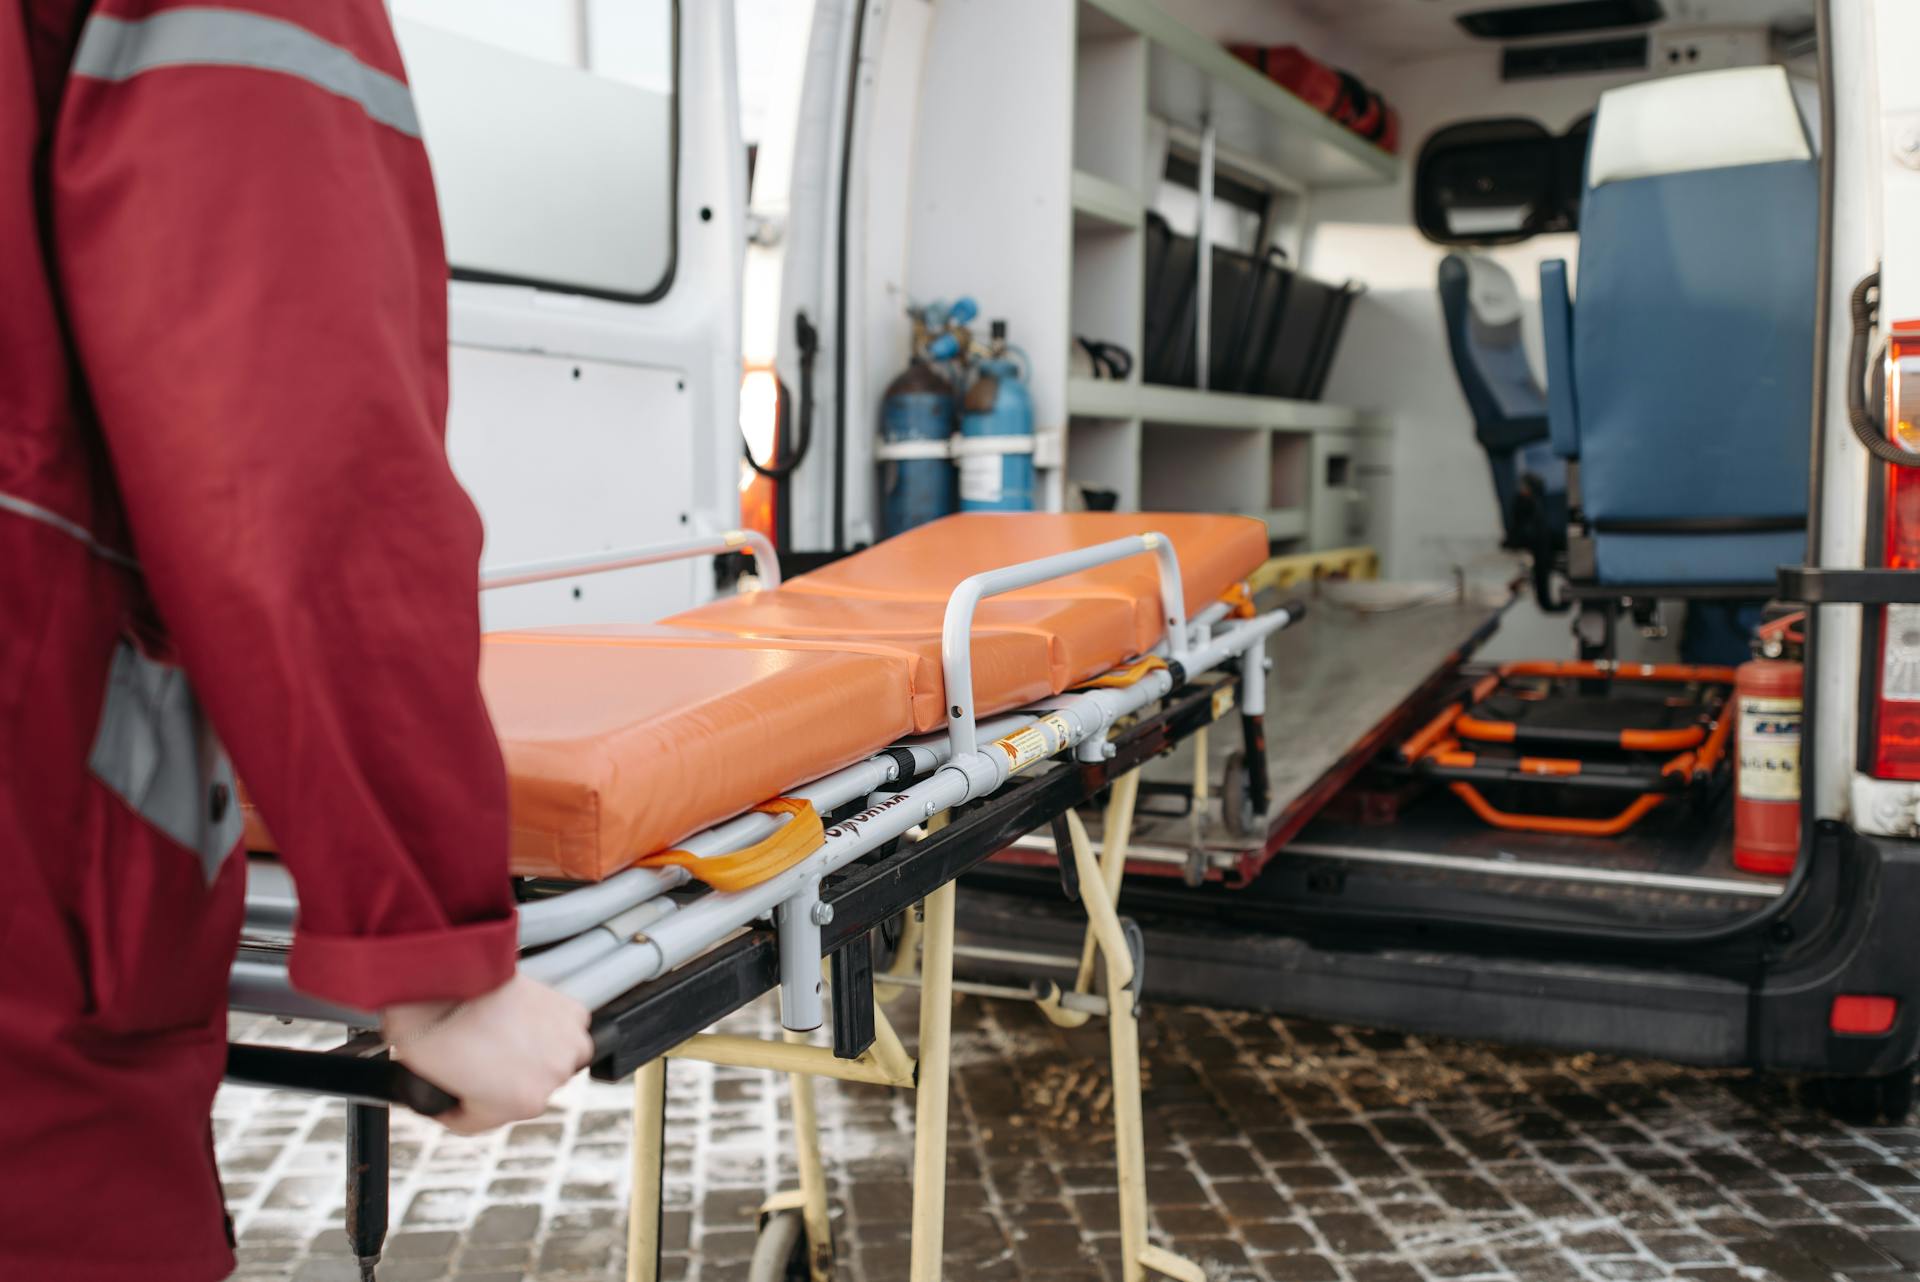 A paramedic pulling out a stretcher | Source: Pexels